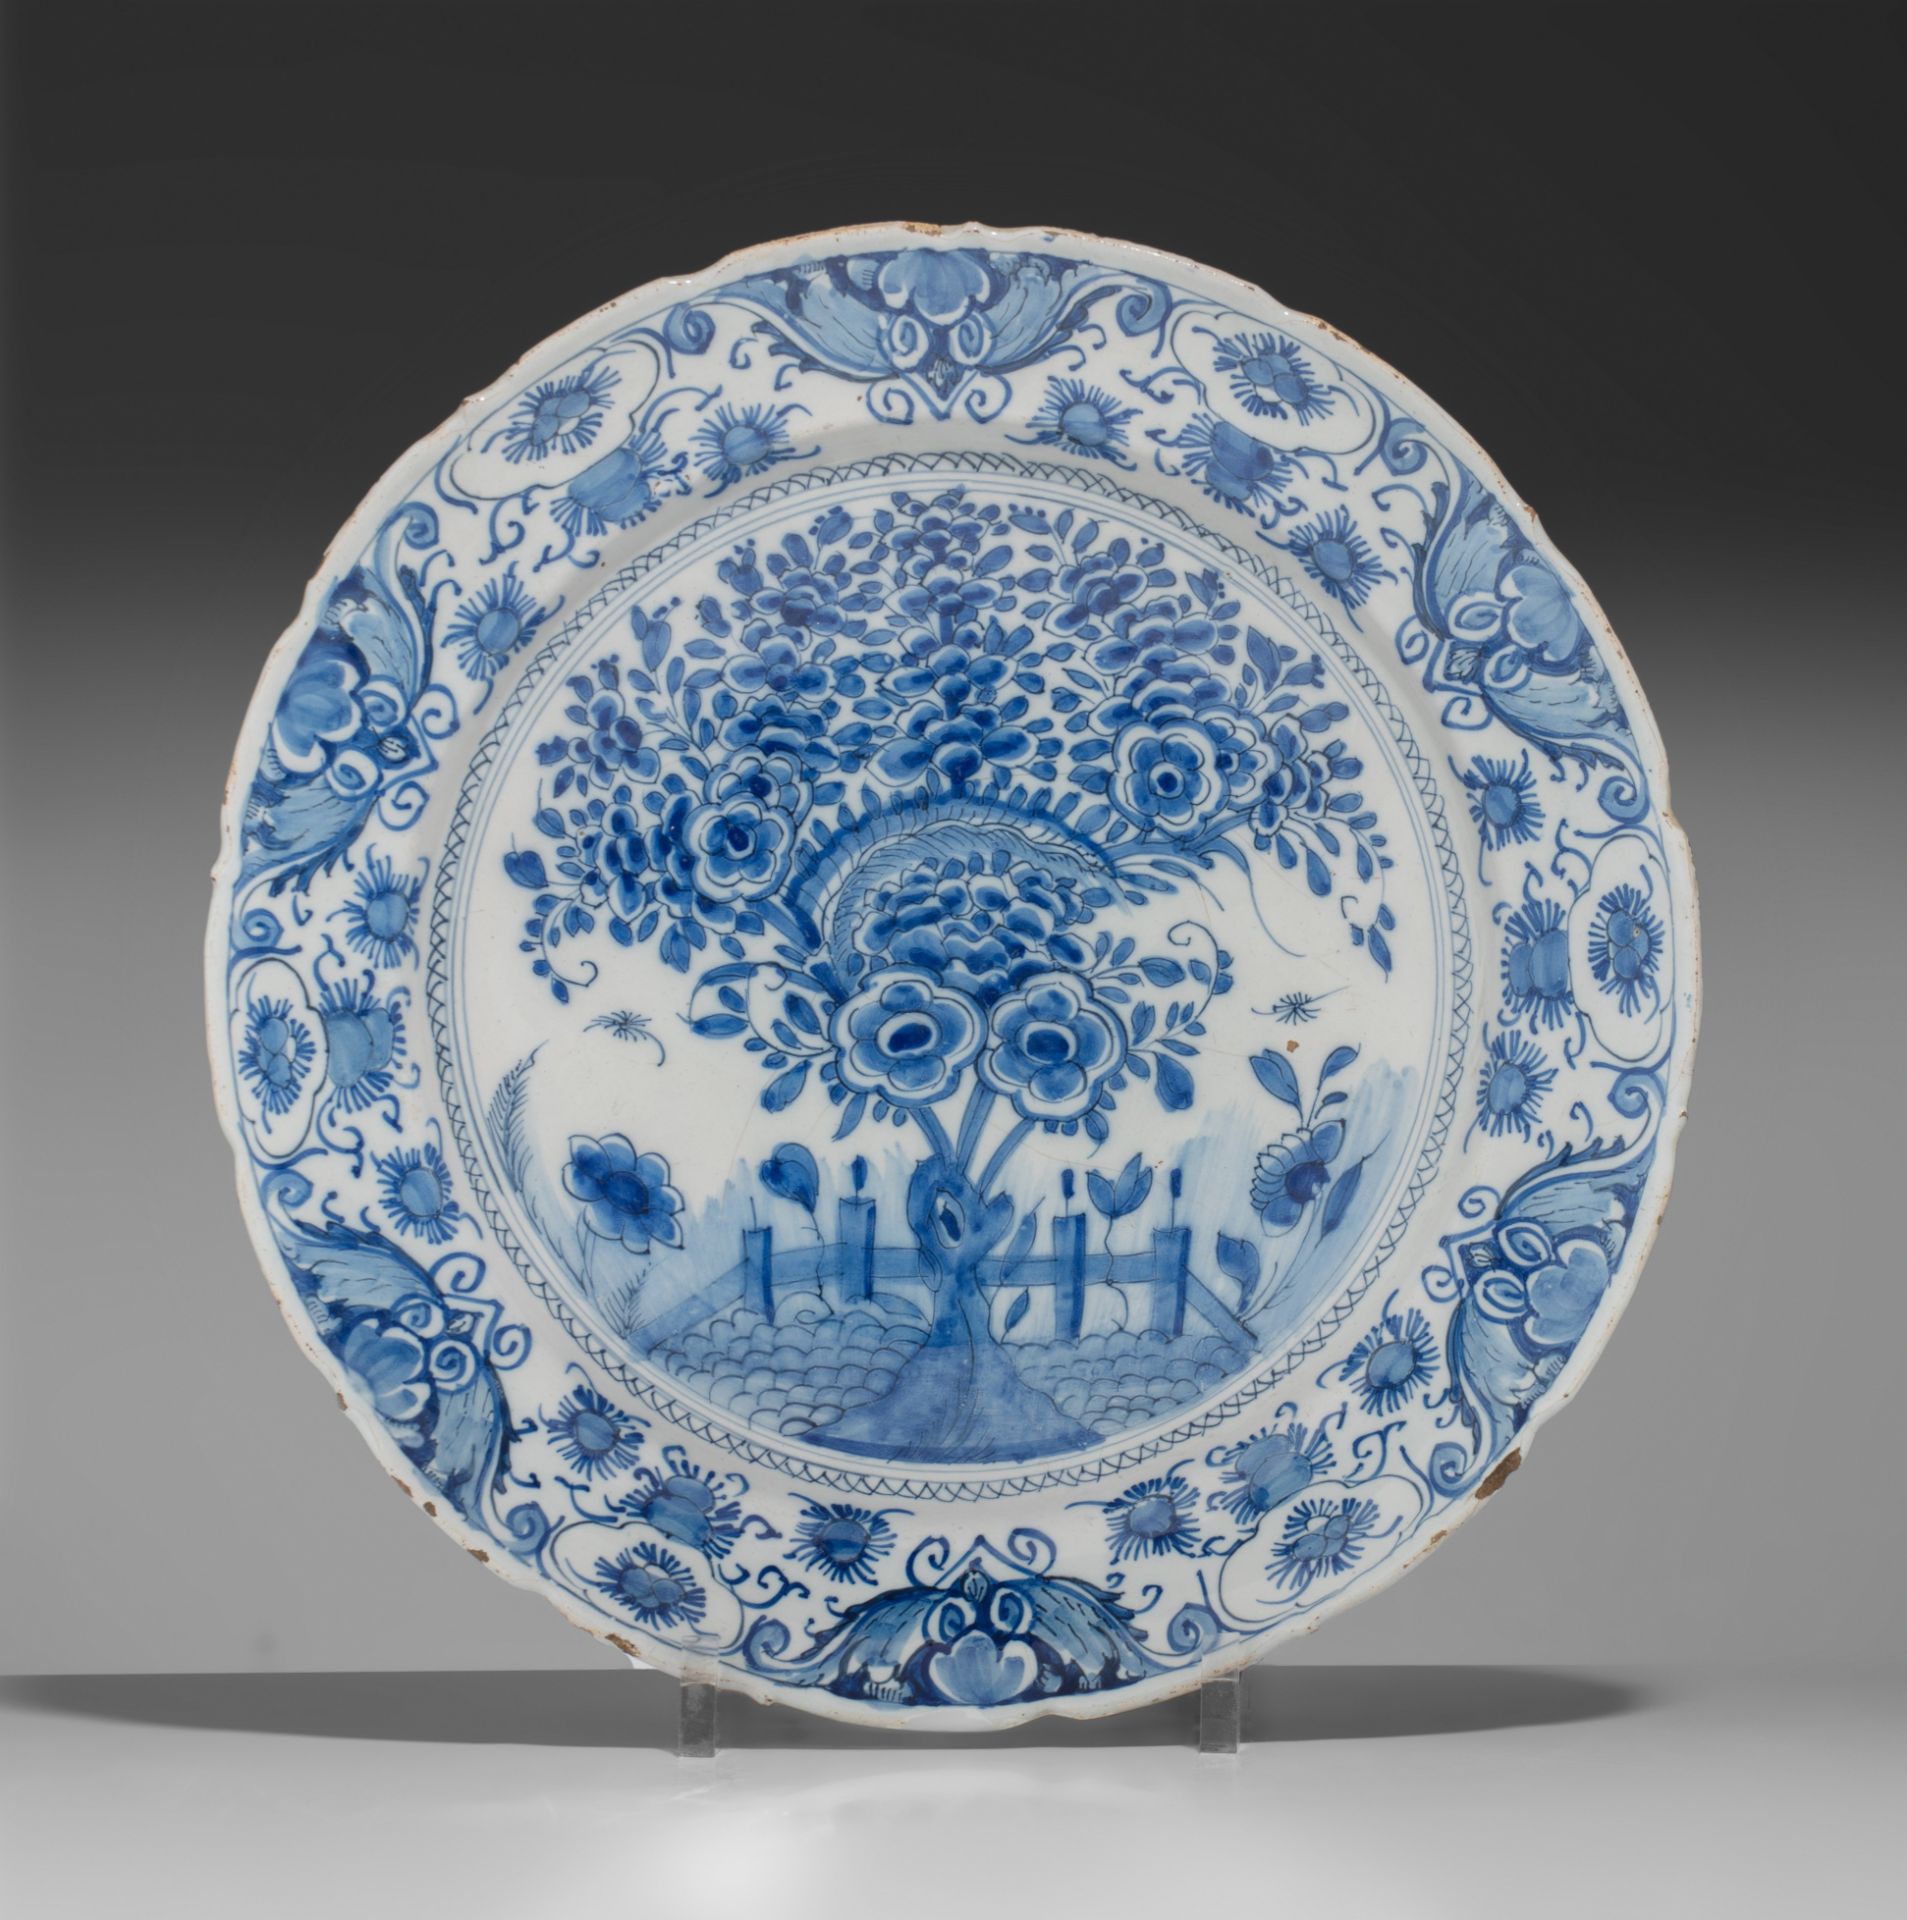 A pair of 18thC Delft plates by Geertruy Verstelle, added 12 blue and white plates, ø 16 - 34 cm - Image 4 of 17